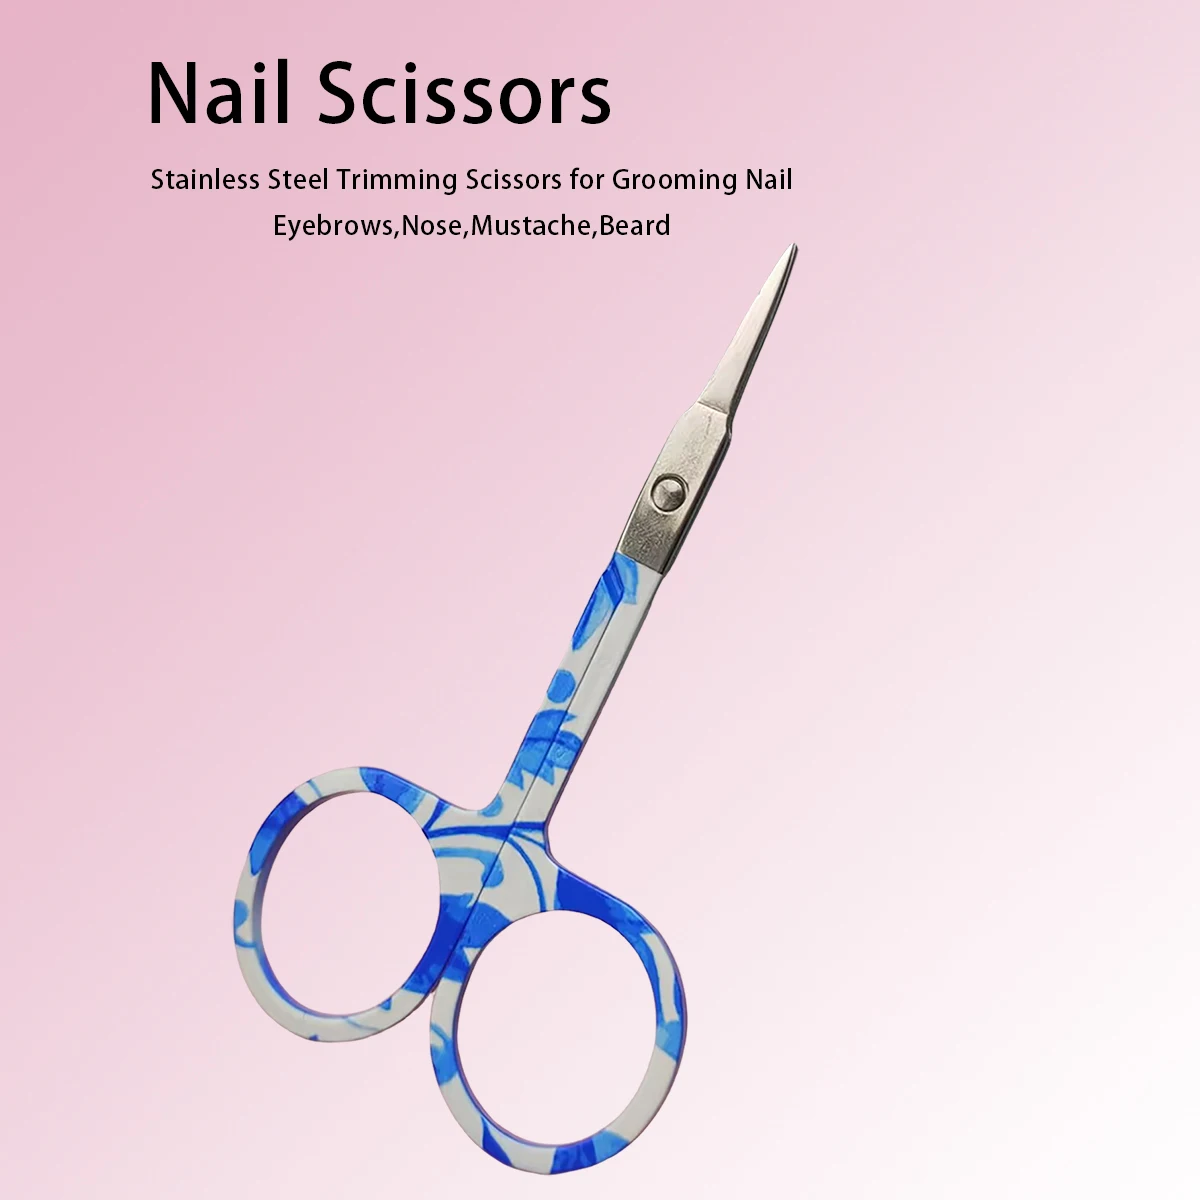 

EasyNail 1pcs set Mirror surface Straight Curve Head Professional Cuticle Manicure Pedicure Nails Scissors eyebrow Nose Hair